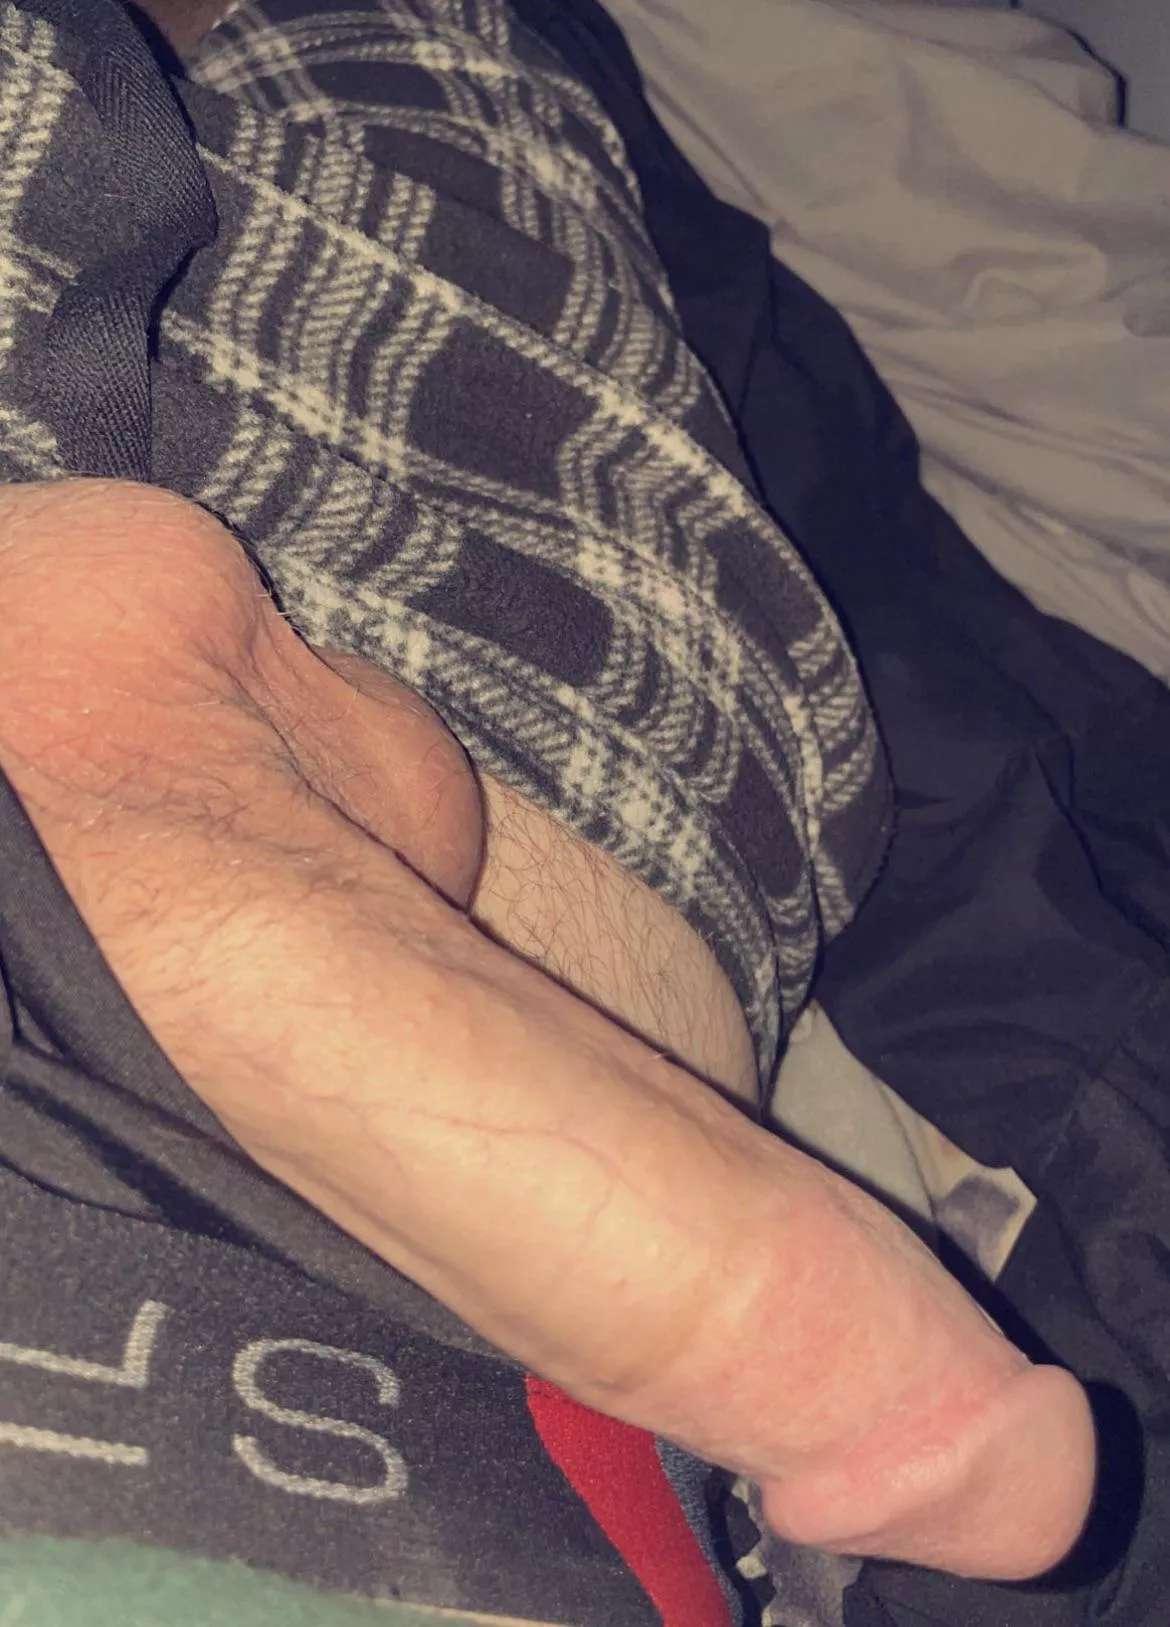 19 m Winnipeg Manitoba 🇨🇦 about to jerk off anyone wanna join me hmu, be close to my age pleaseeeee!! Hung+++ cute+++ snap kddavi20 nudes GaySnapchatImages NUDE-PICS image